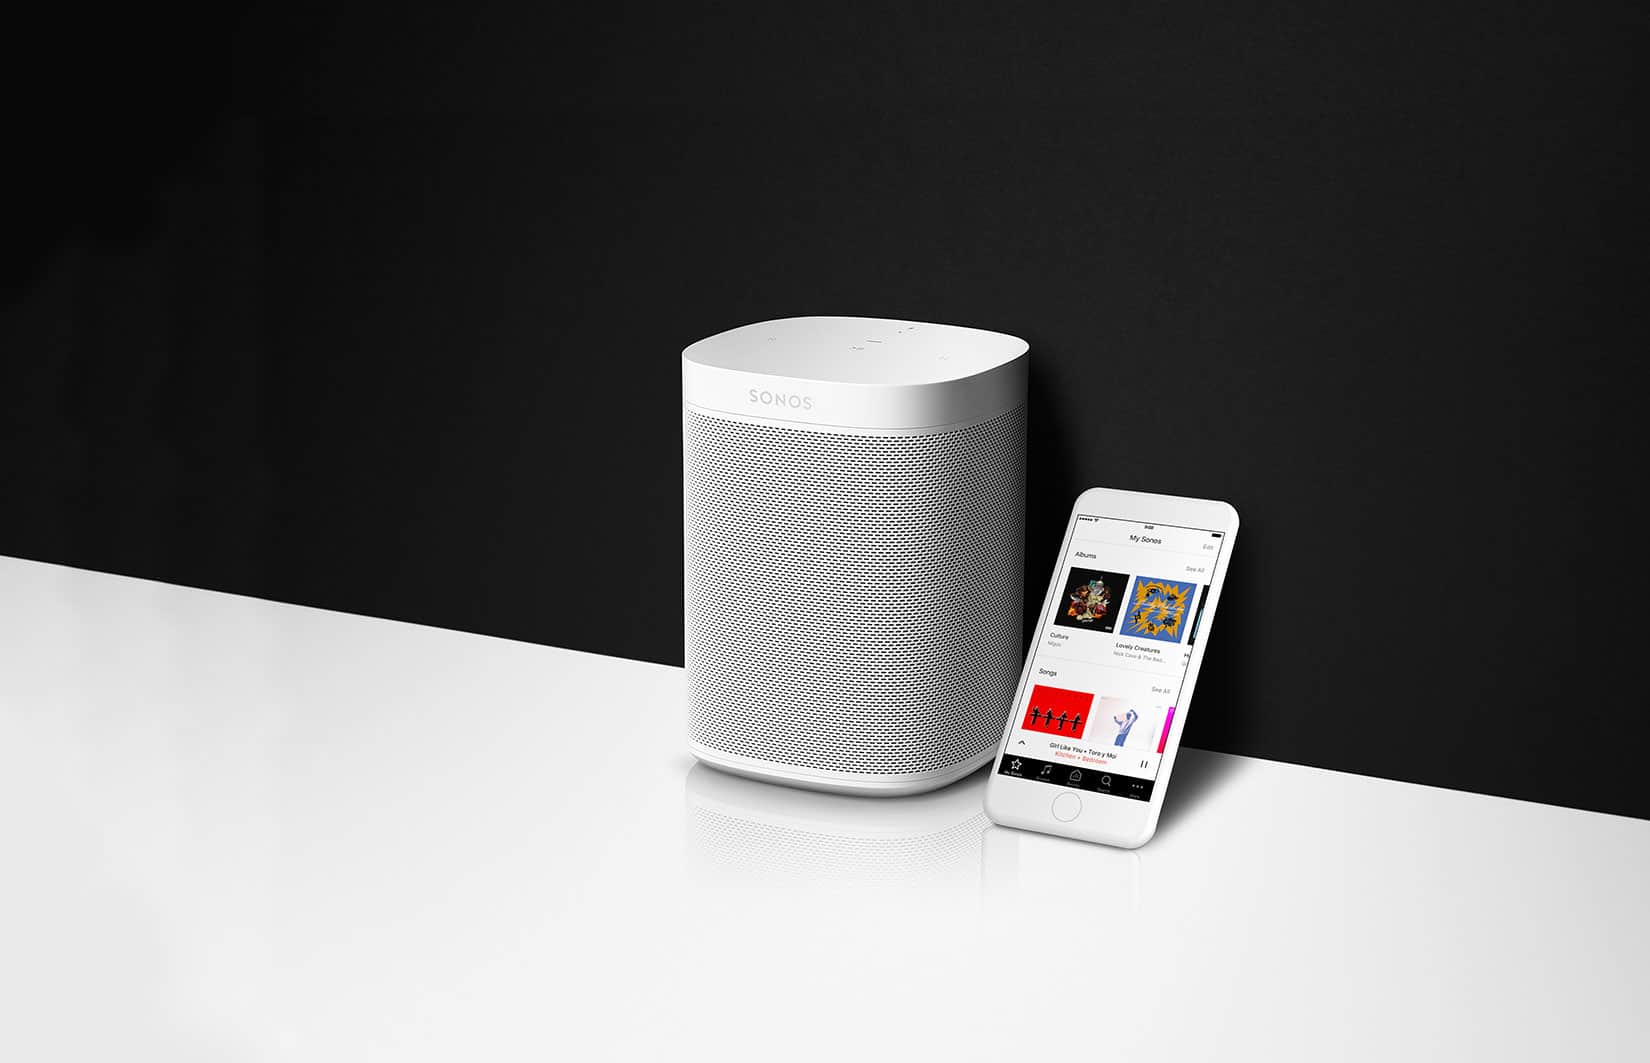 Sonos speakers just got smarter with AirPlay 2 upgrade | Cult of Mac